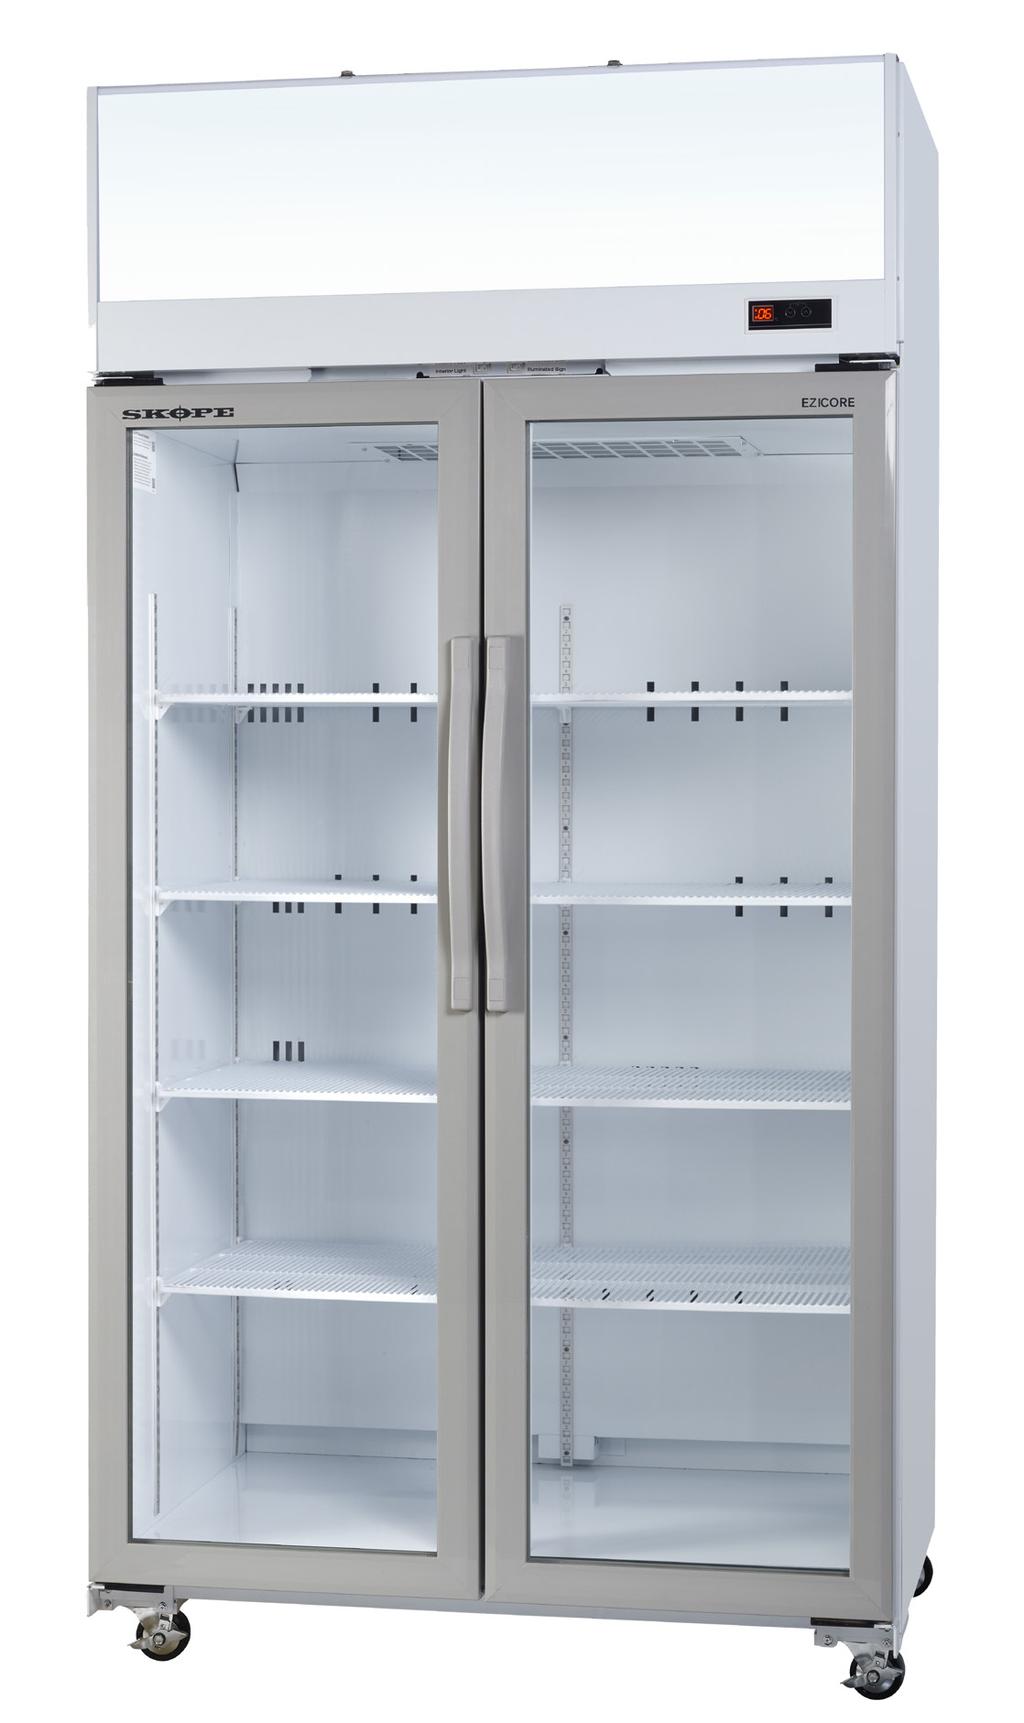 TCE00 2 door upright glass door fridge Our entry level General Display fridge, with EZICORE - a convenient & easy to remove refrigeration cartridge.